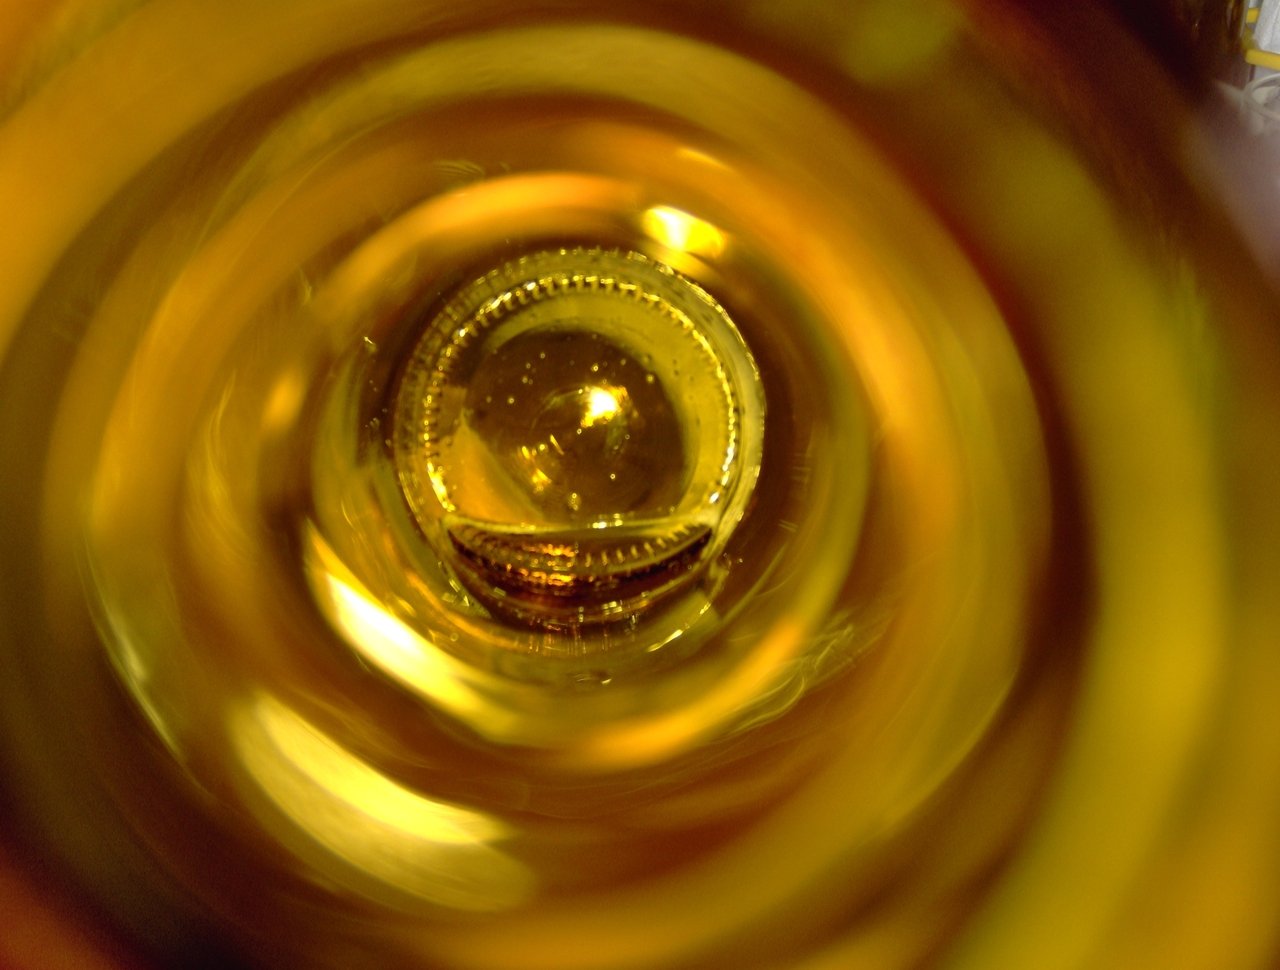 the view from inside a yellow wine bottle